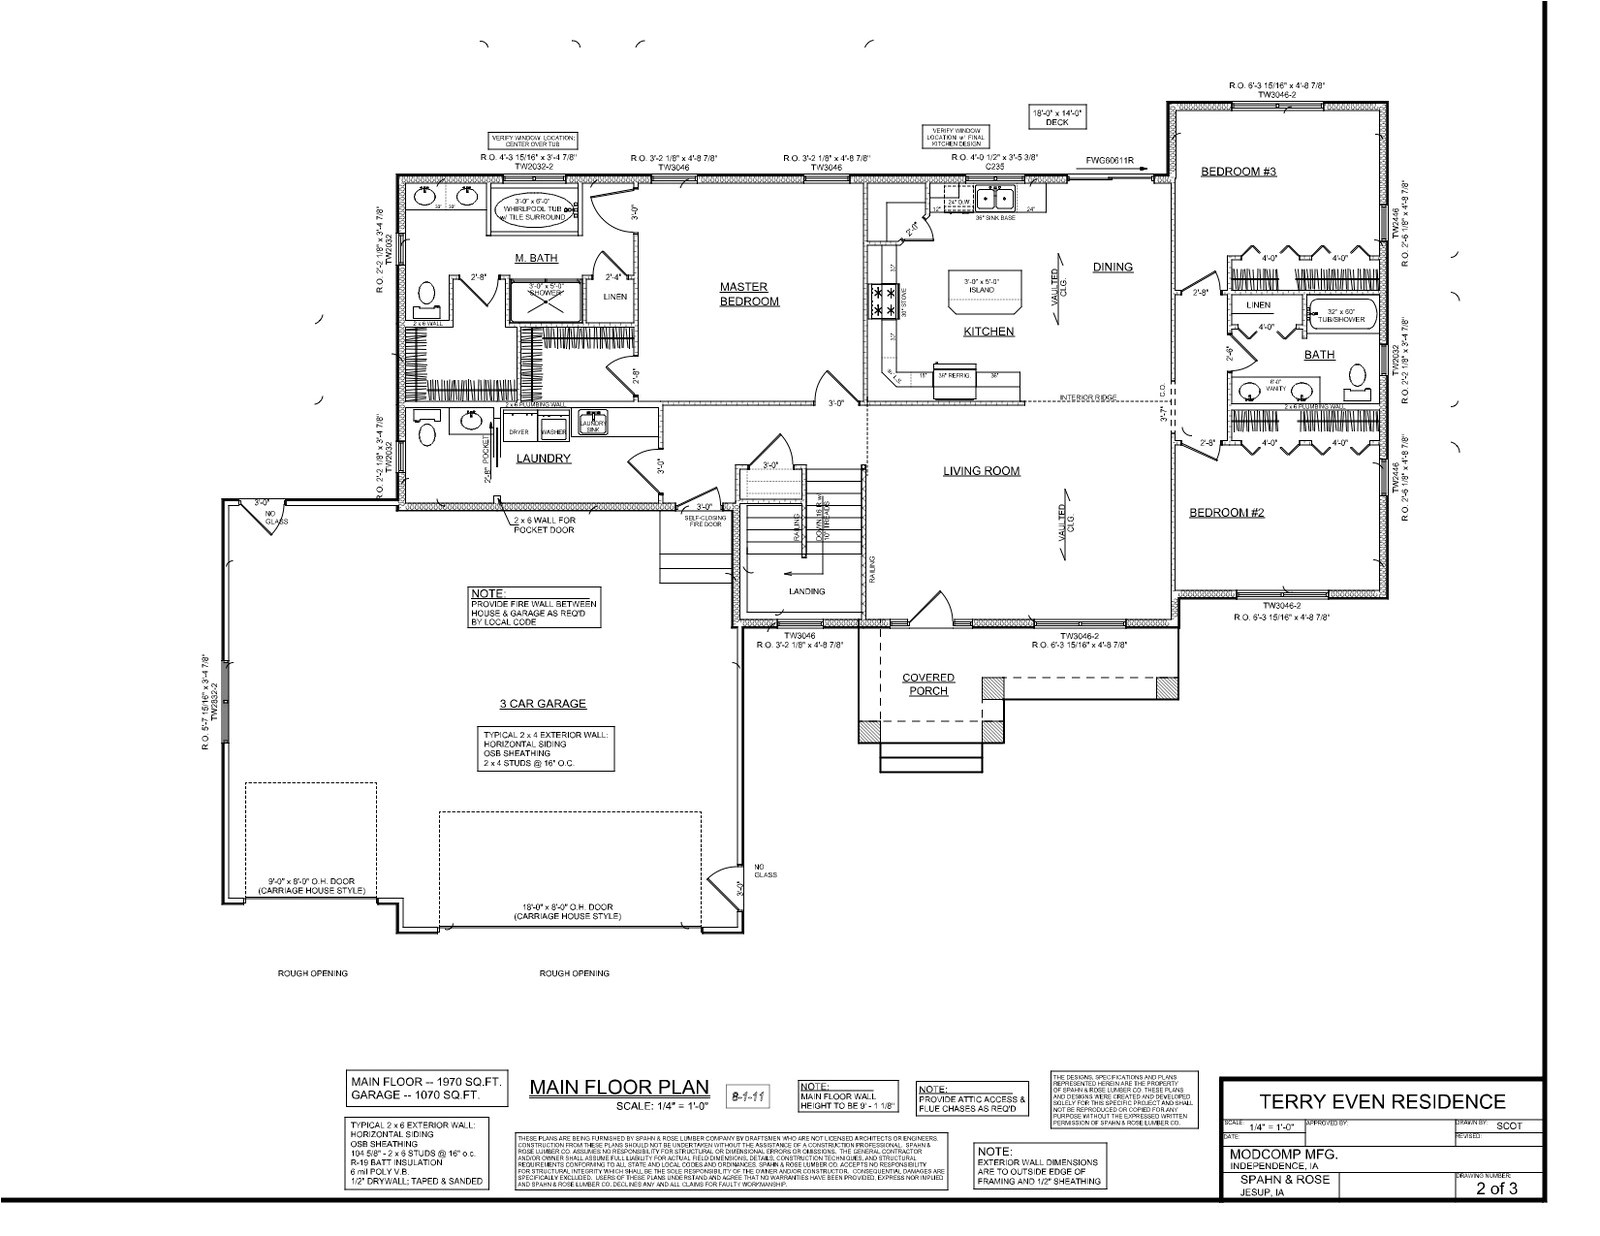 House Plans with Laundry Room attached to Master Bedroom House Plans with Laundry Room Near Master